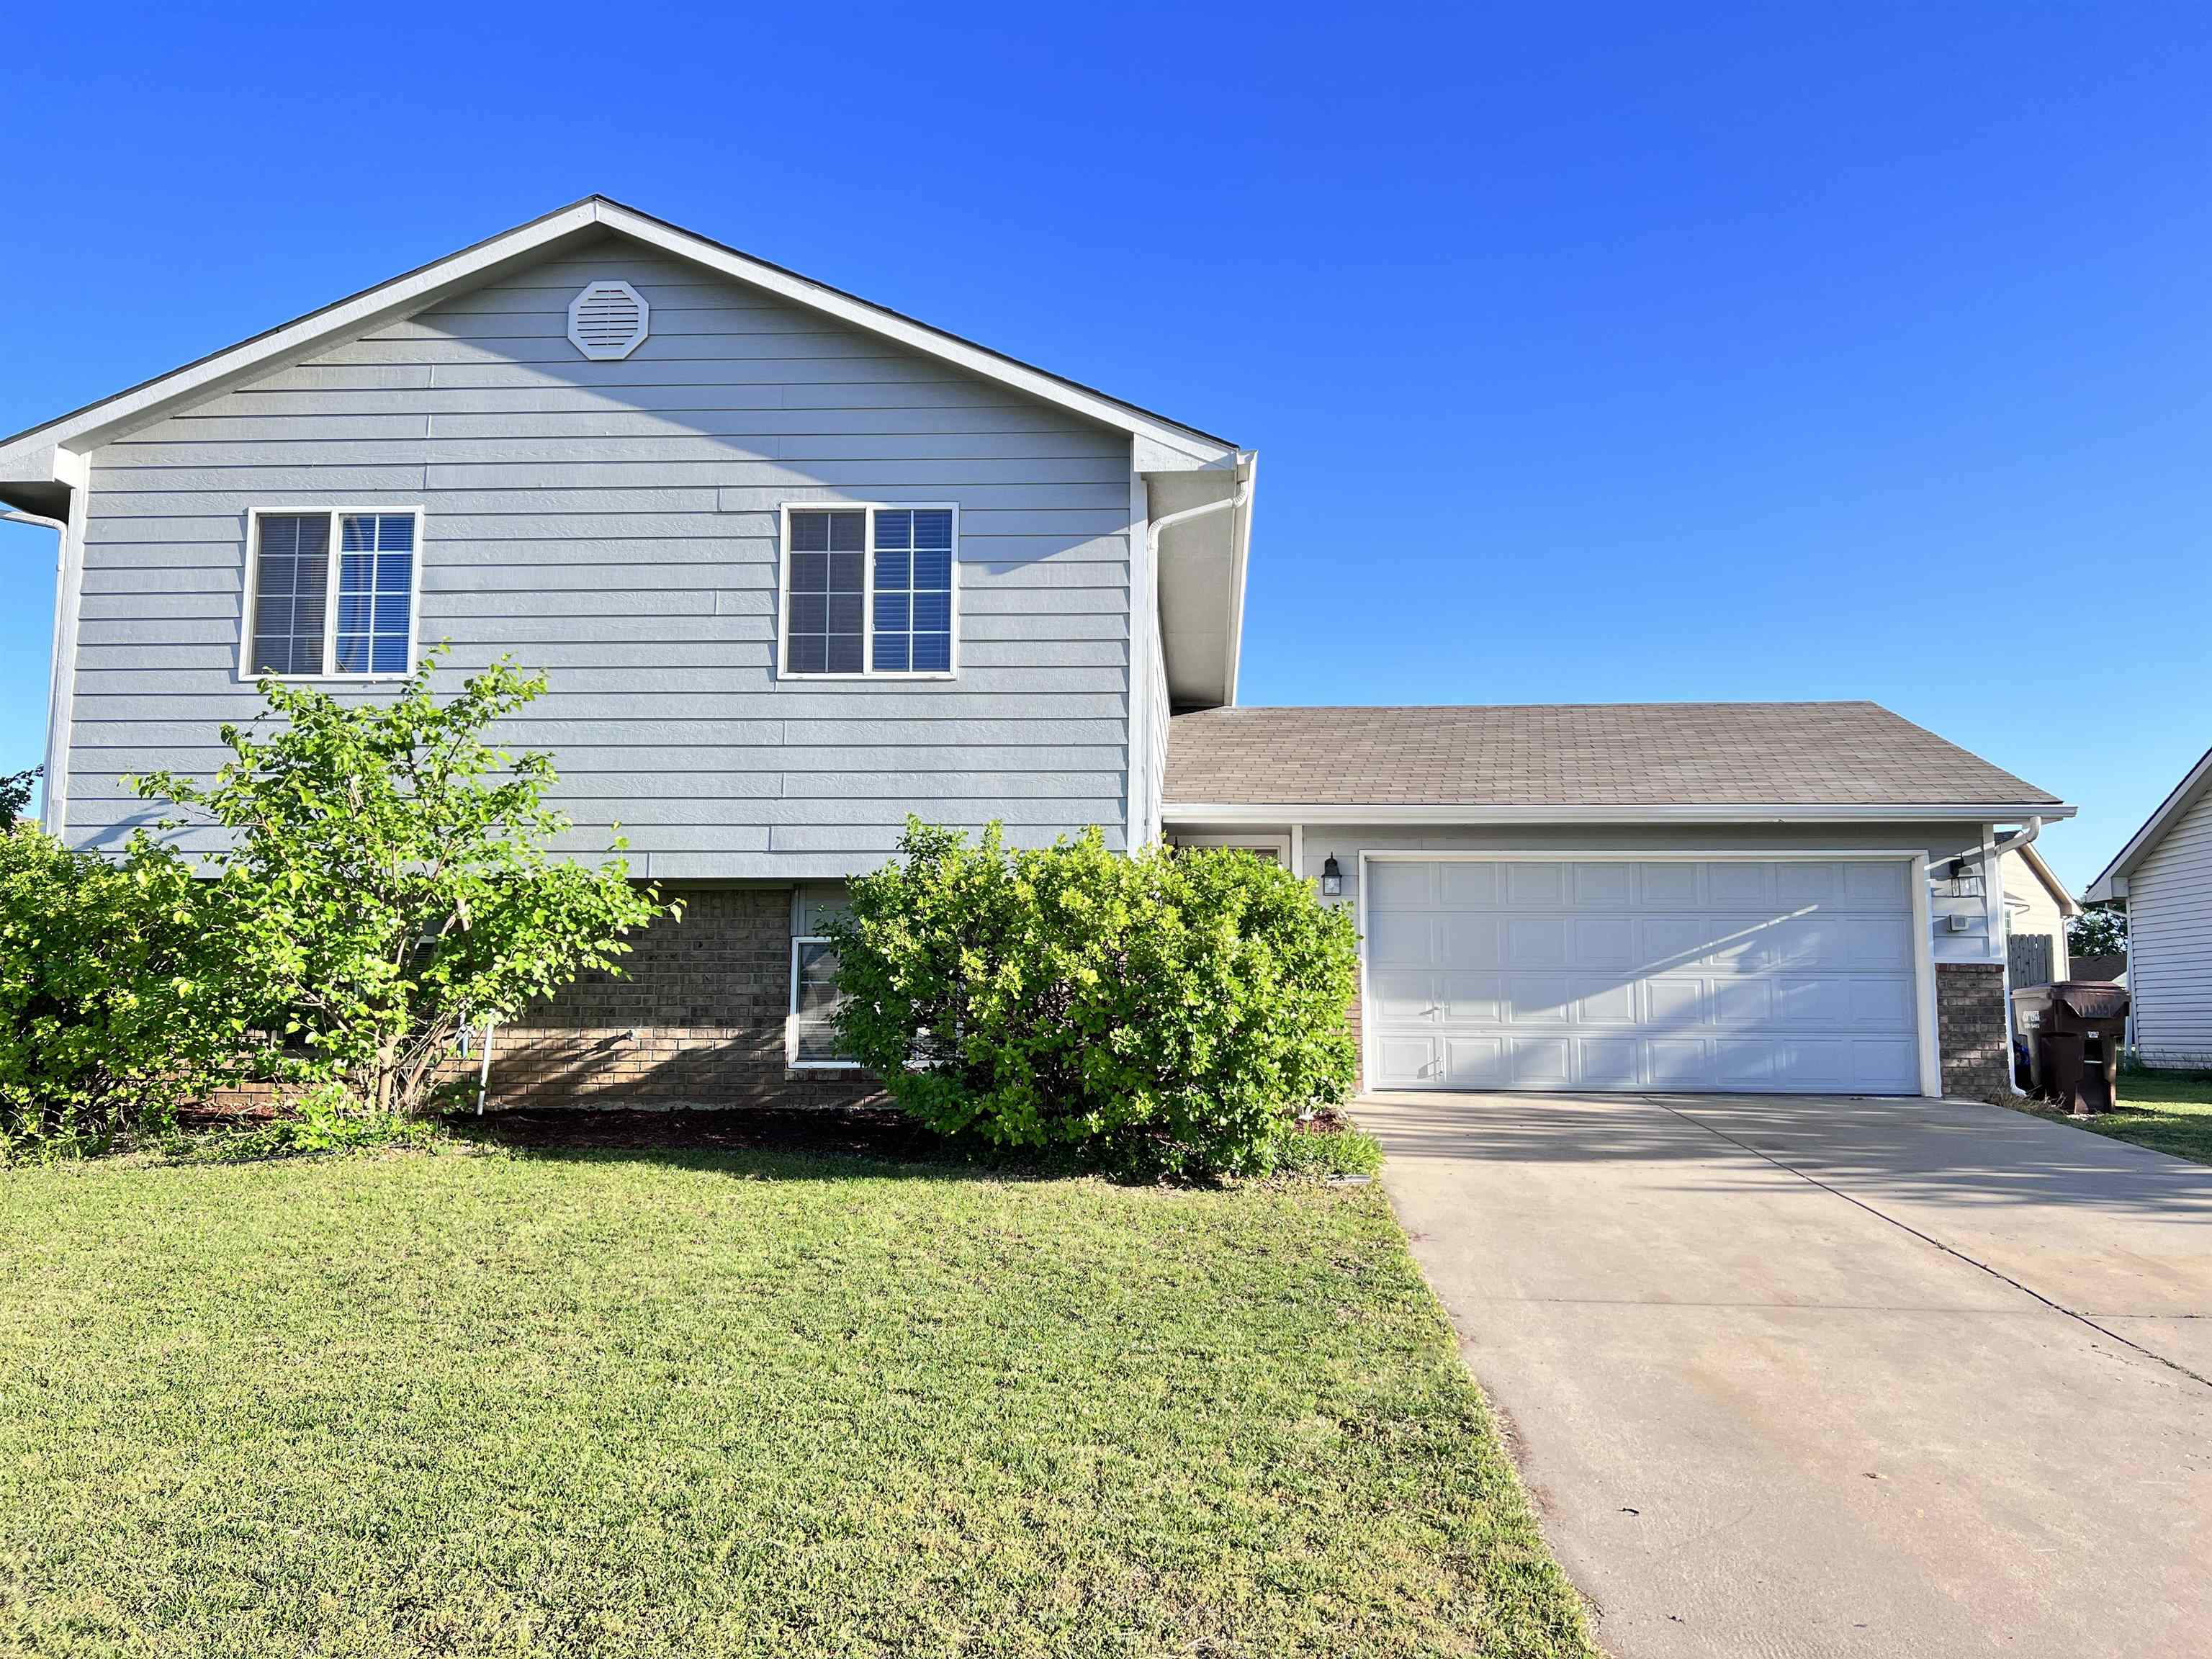 Come see this desirable and well maintained 1,614 SF, NE of Wichita Home with quality updates. This 